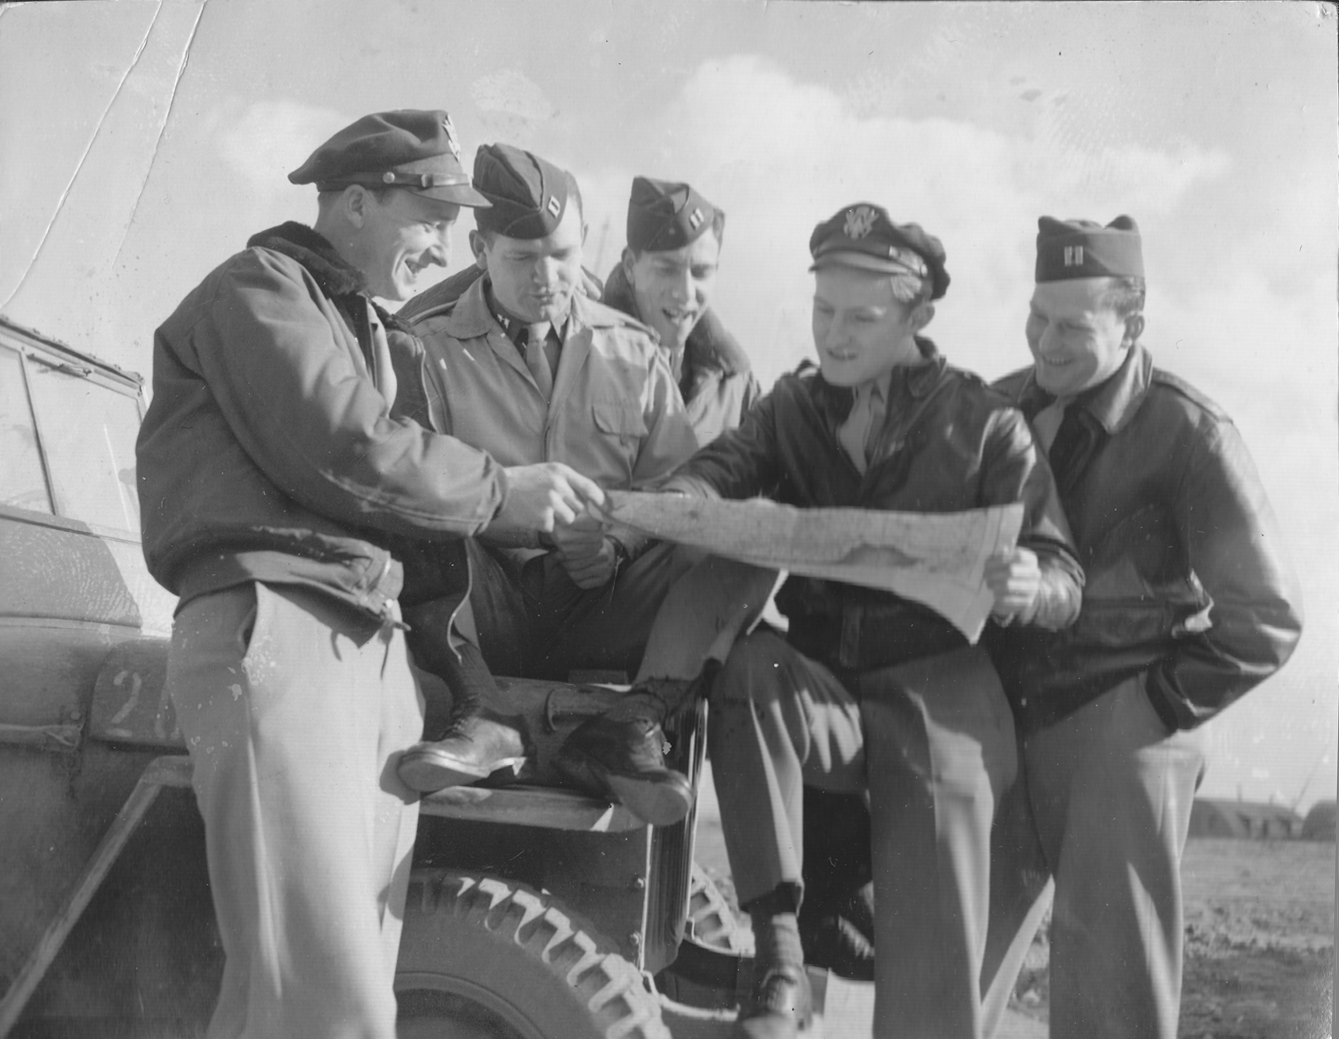 Harry Crosby, second from right, studies a map with other U.S. Army Air Forces navigators during World War II.